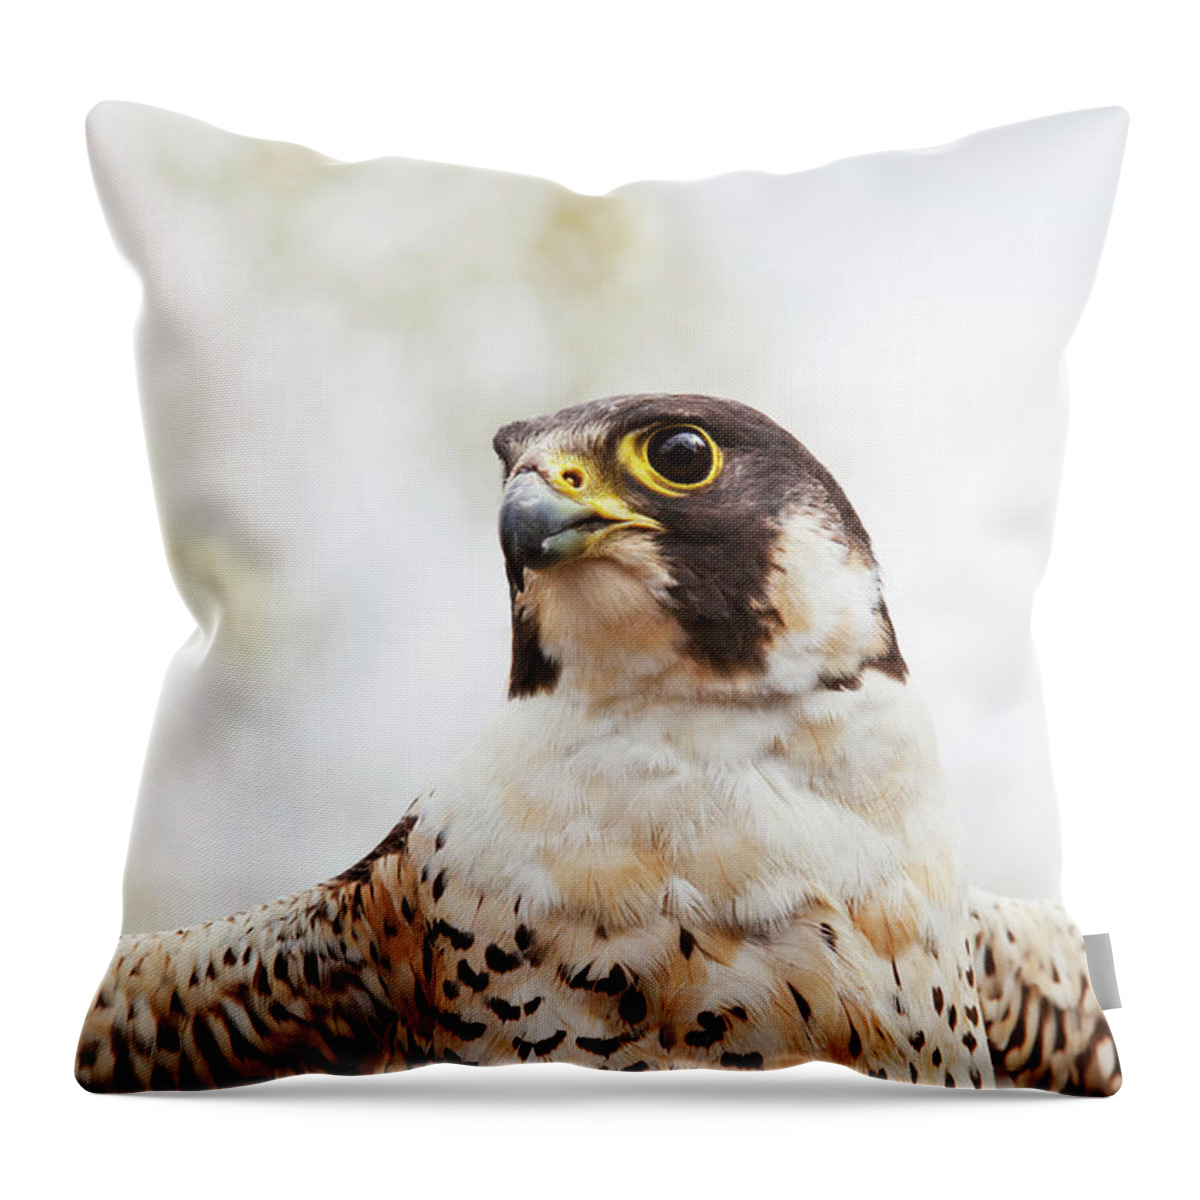 Alertness Throw Pillow featuring the photograph Falcon On The Look For Prey by Richard Wear / Design Pics